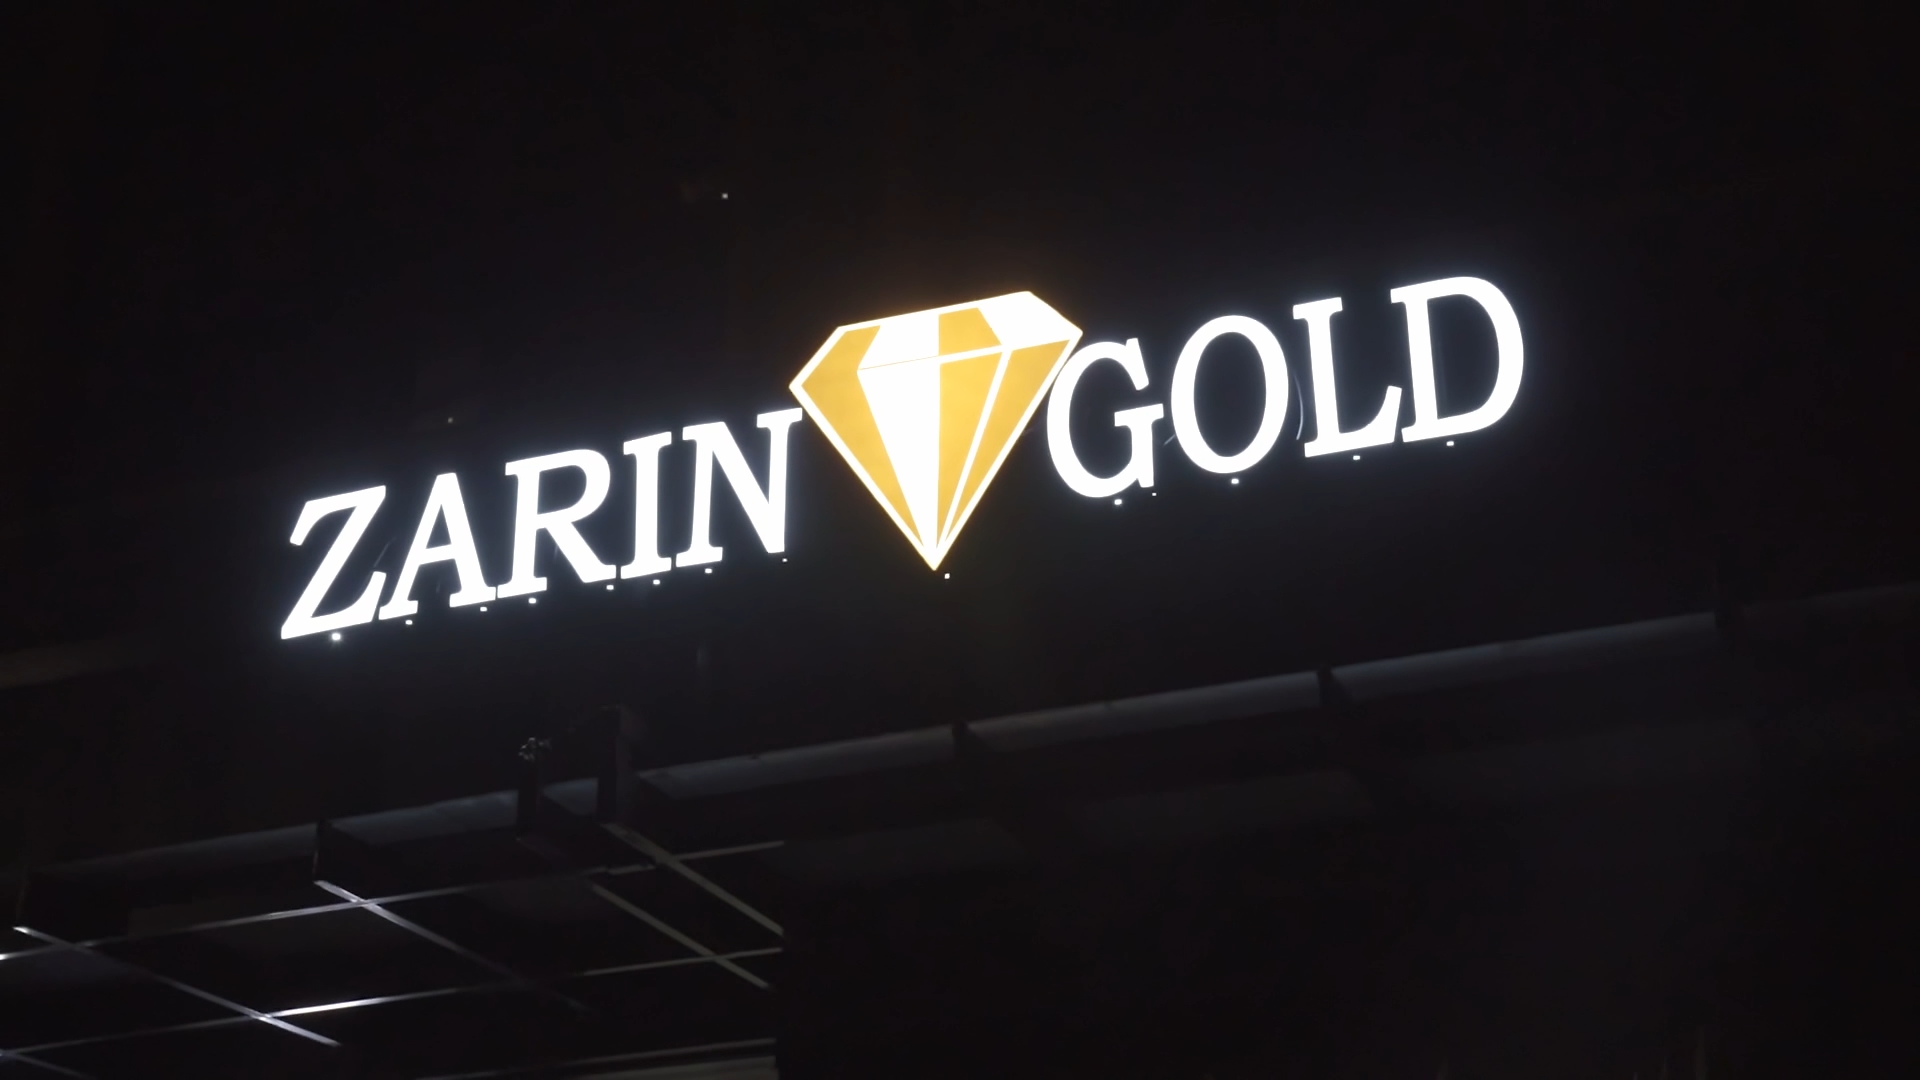 Zarin Gold Illuminated Commercial Signs